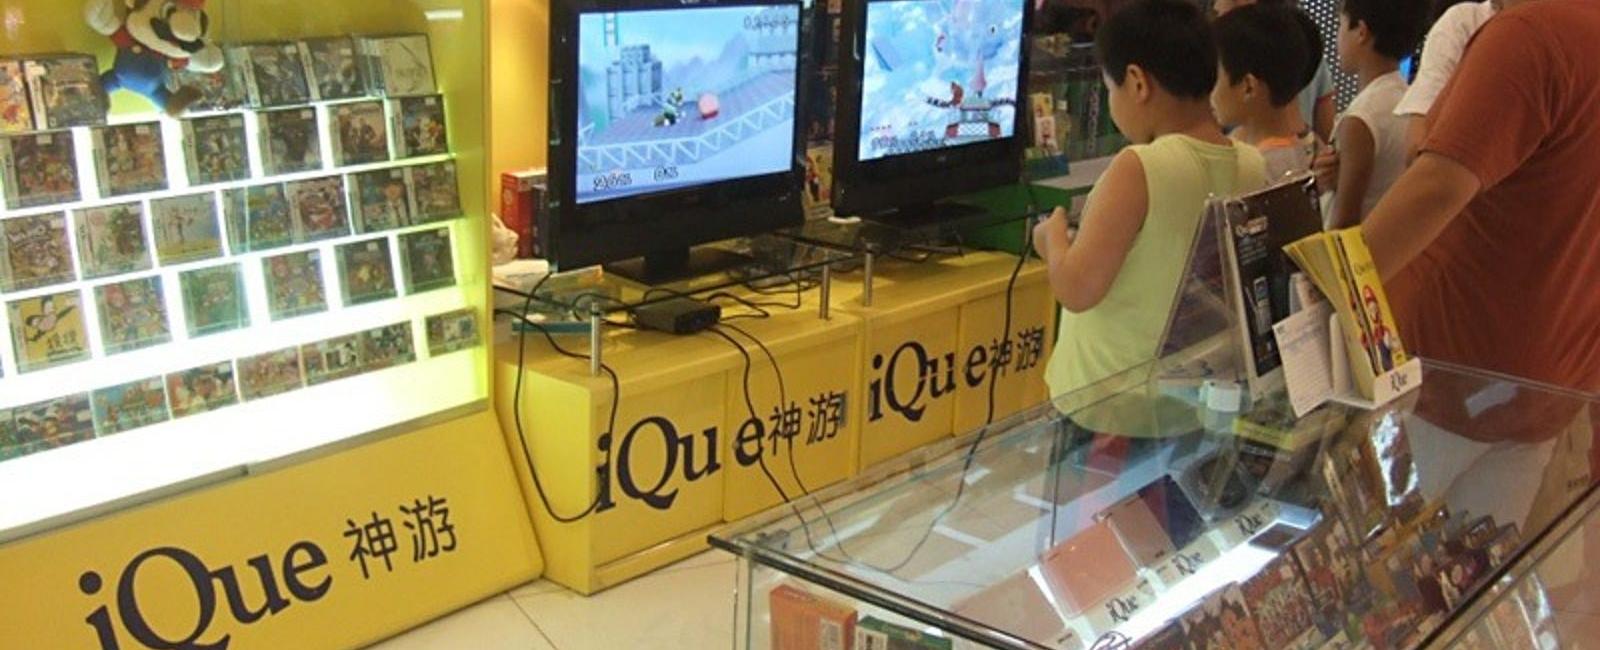 In china the playstation is illegal